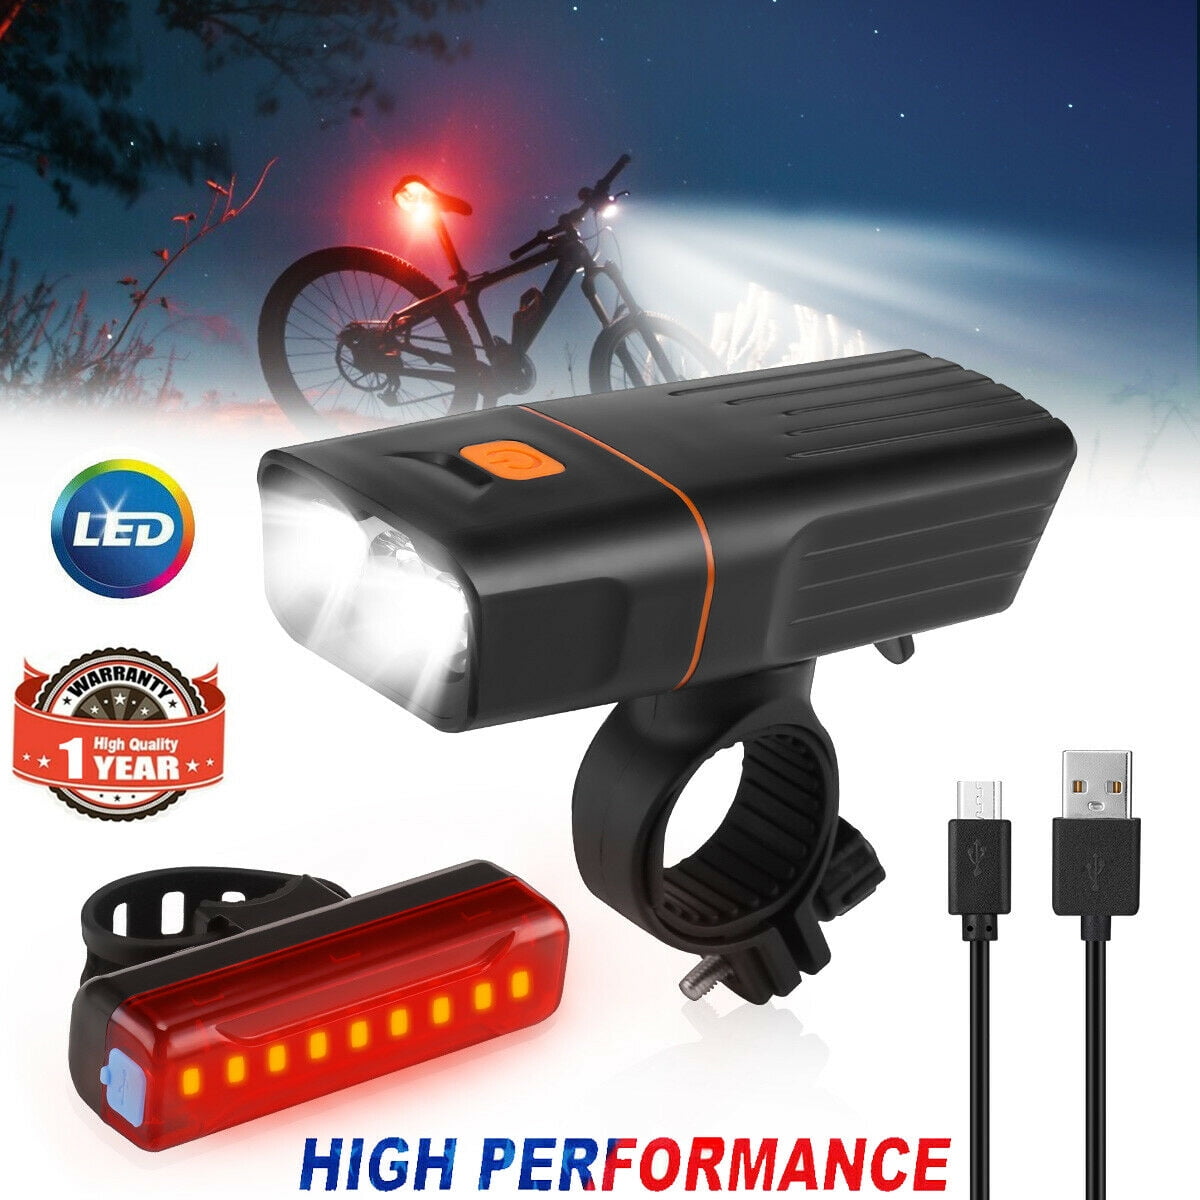 2 PCS//Set USB Rechargeable Bicycle Headlight Front Lamp/&Rear Taillight LED Light